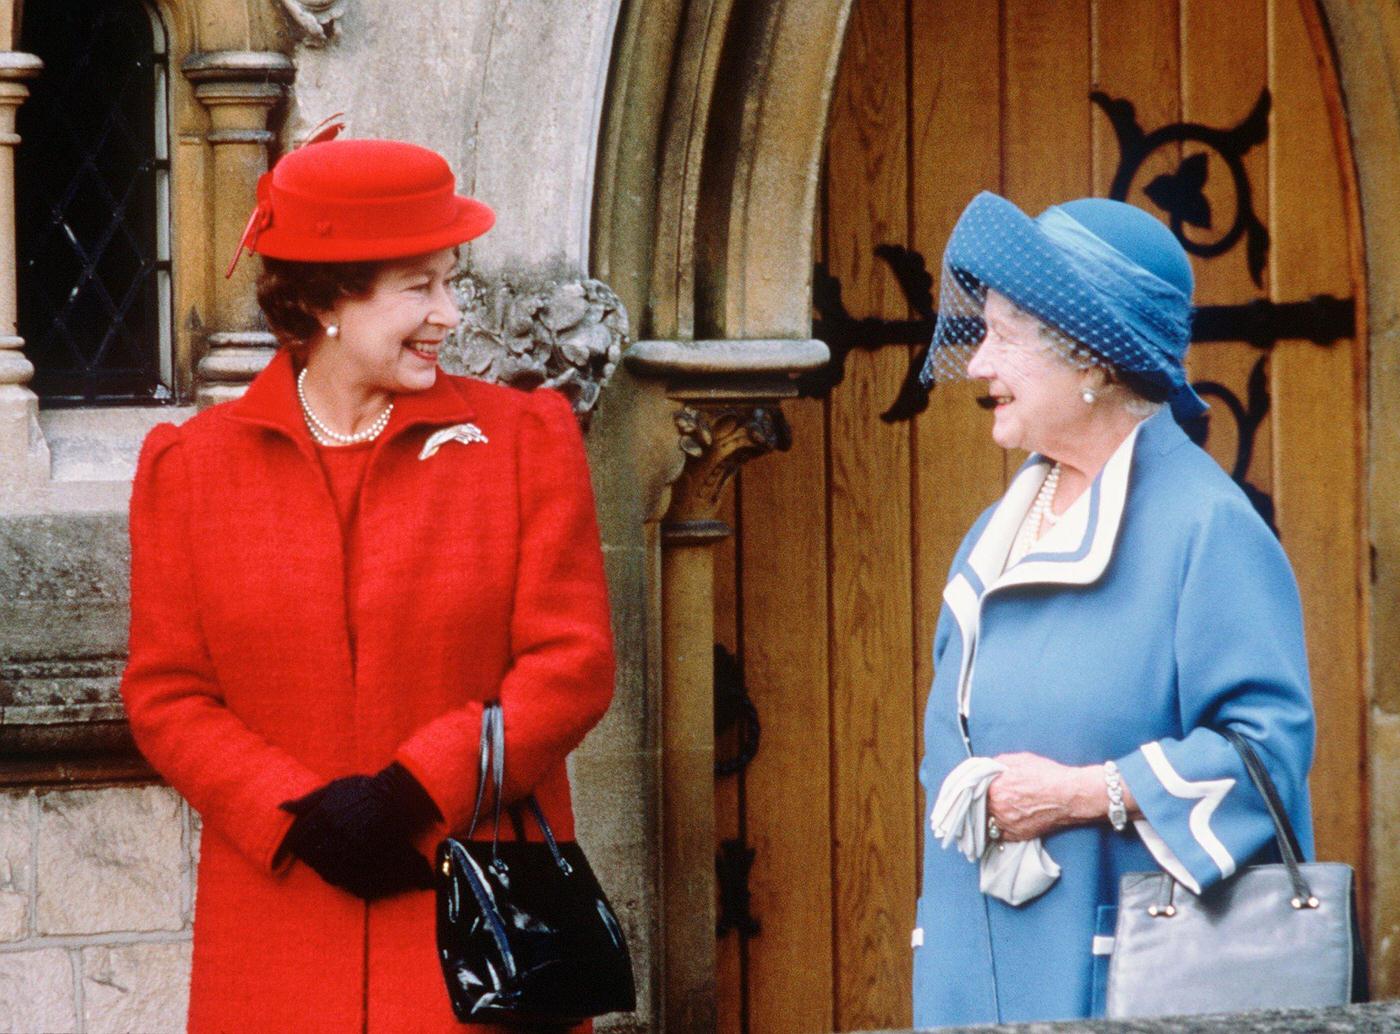 Queen Elizabeth II and the Queen Mother at All Saints Church in Windsor during 1987.